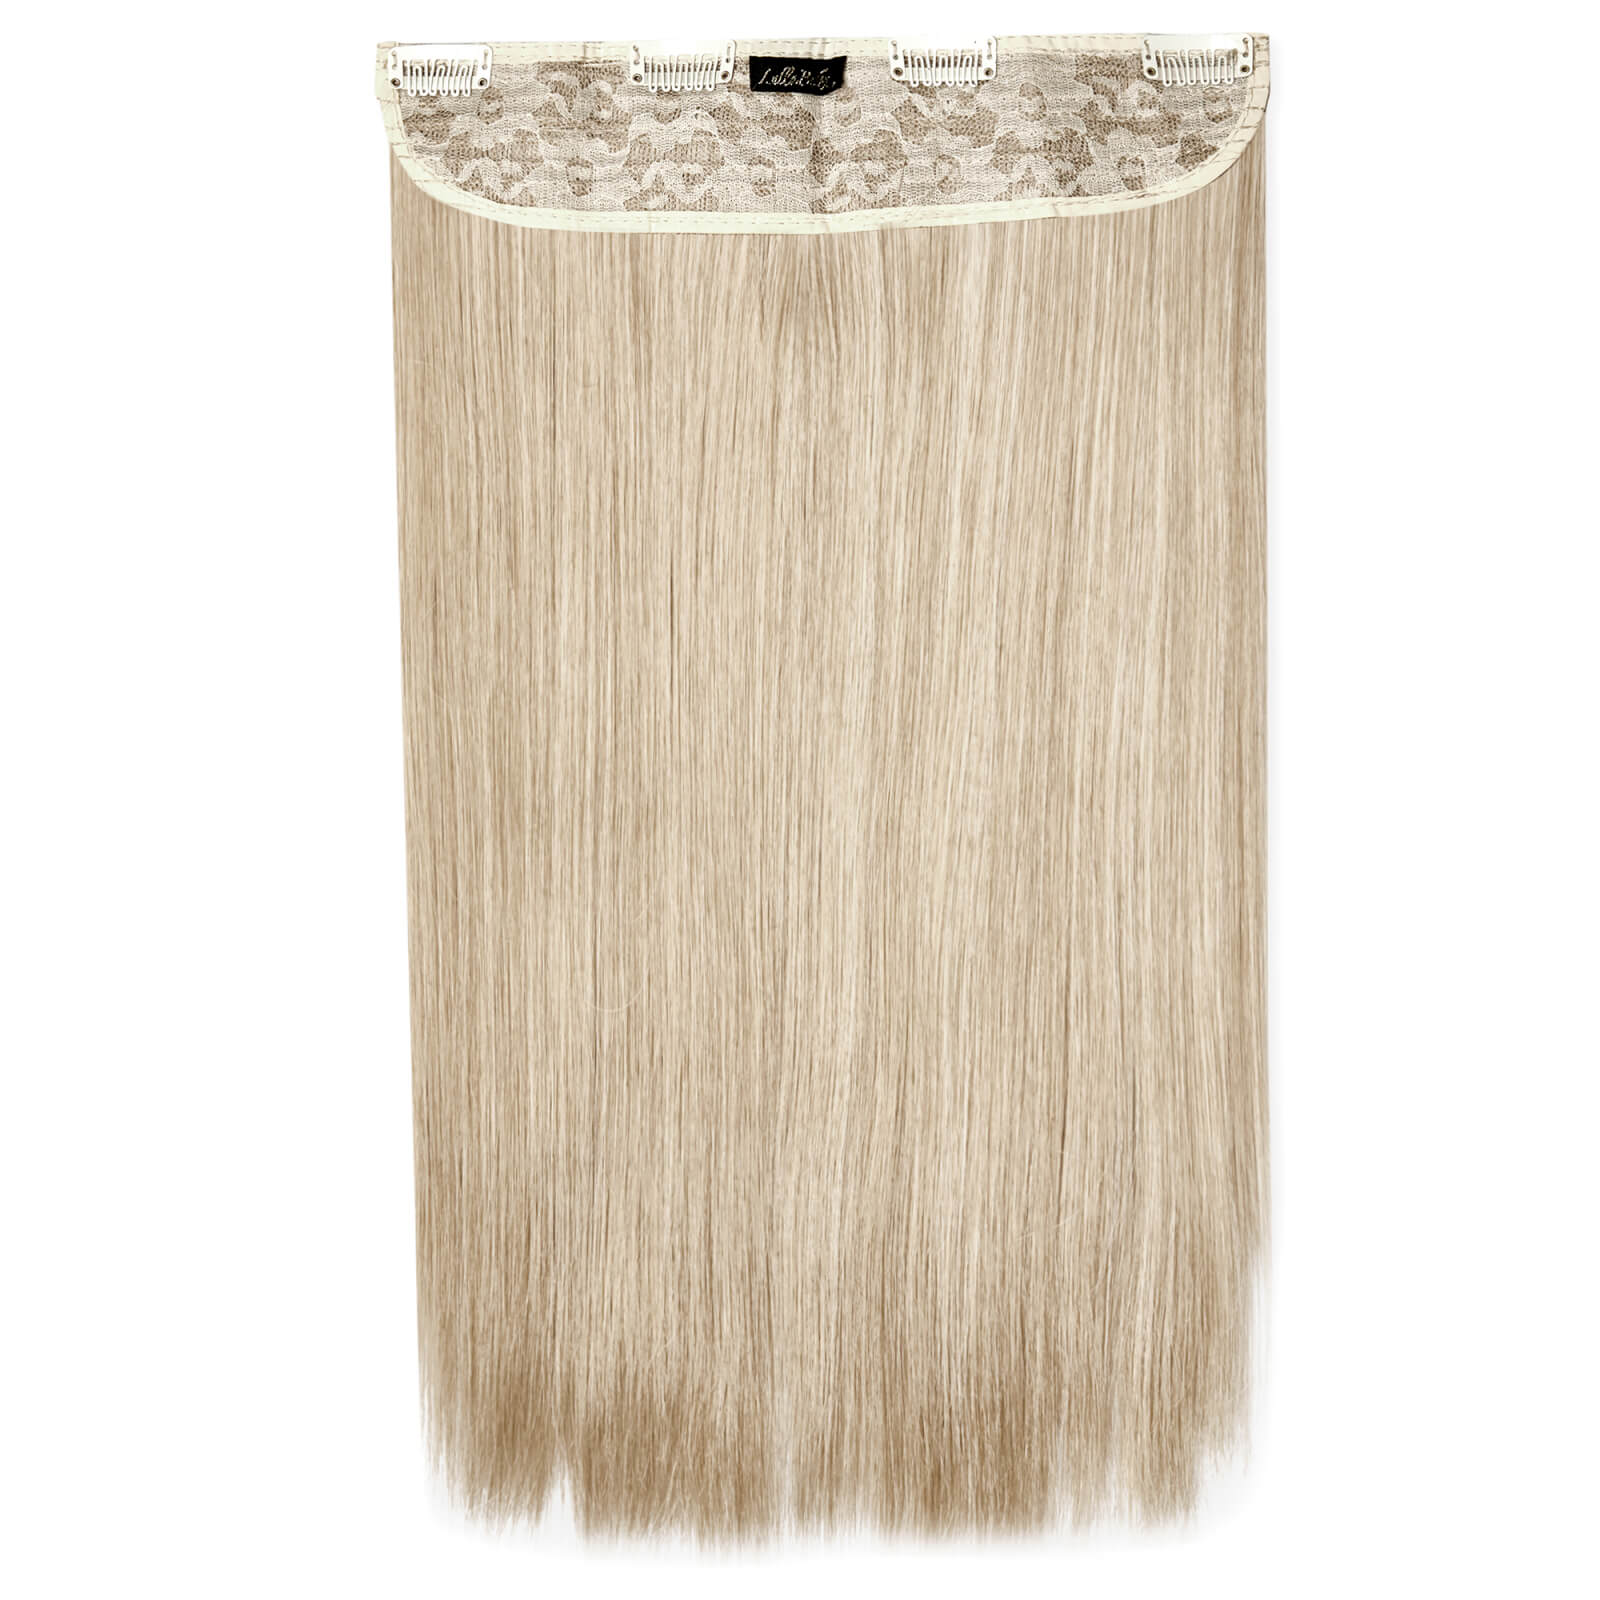 LullaBellz Thick 18 1-Piece Straight Clip in Hair Extensions (Various Colours) - California Blonde